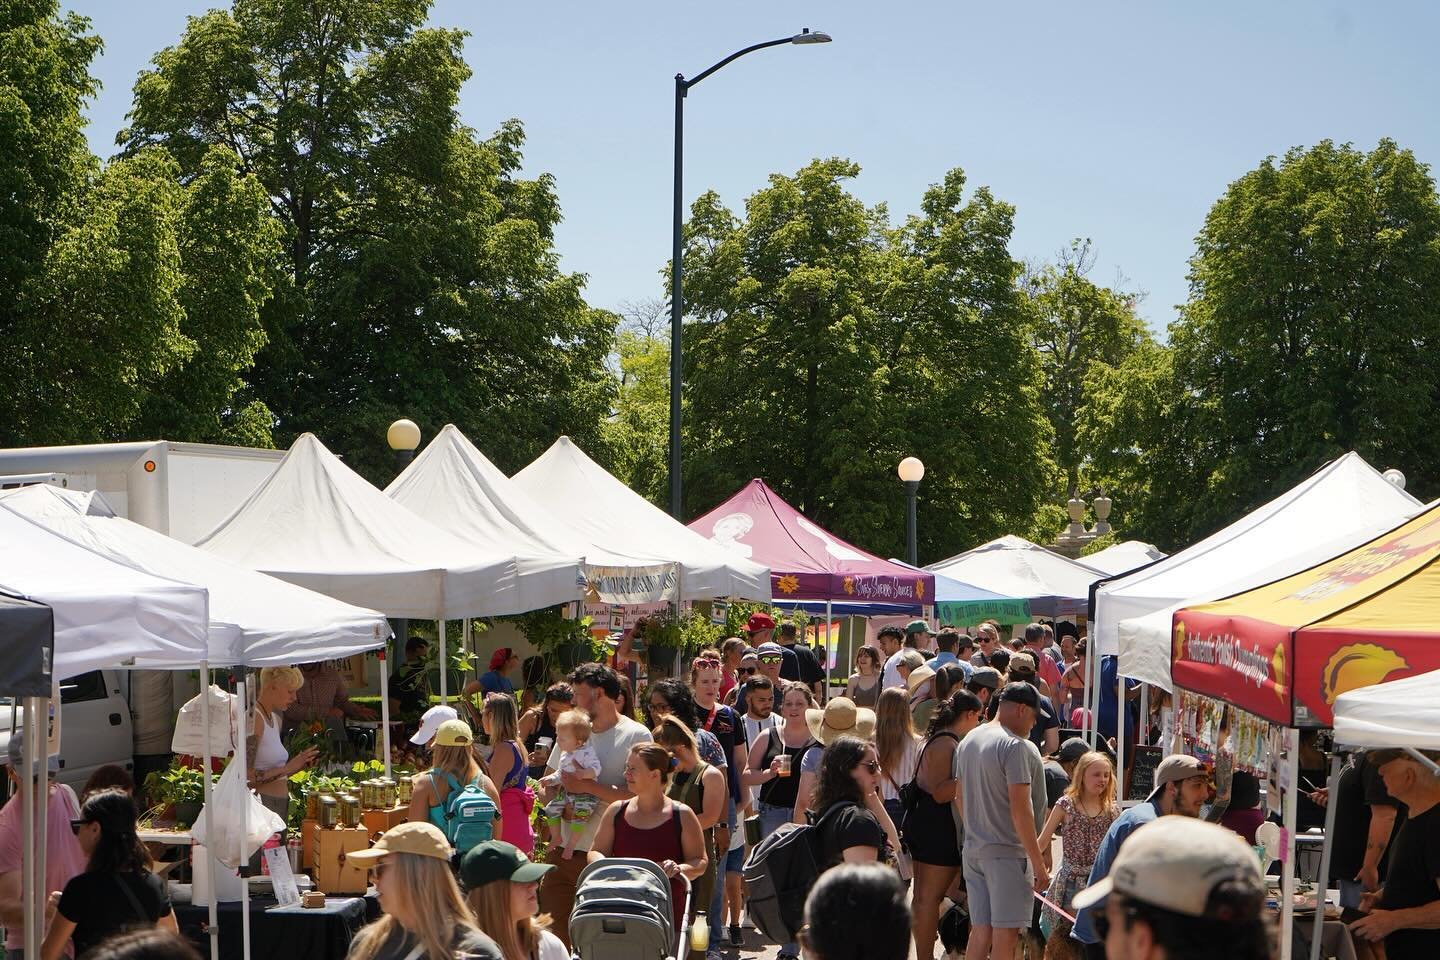 ➡️ for reds, breads, blooms and shrooms. It&rsquo;s finally farmers market season! Head to @cityparkfarmersmarket starting THIS SATURDAY for seasonal produce, flowers, meats, cheeses and more - this market is 100% local and growers-focused, meaning t